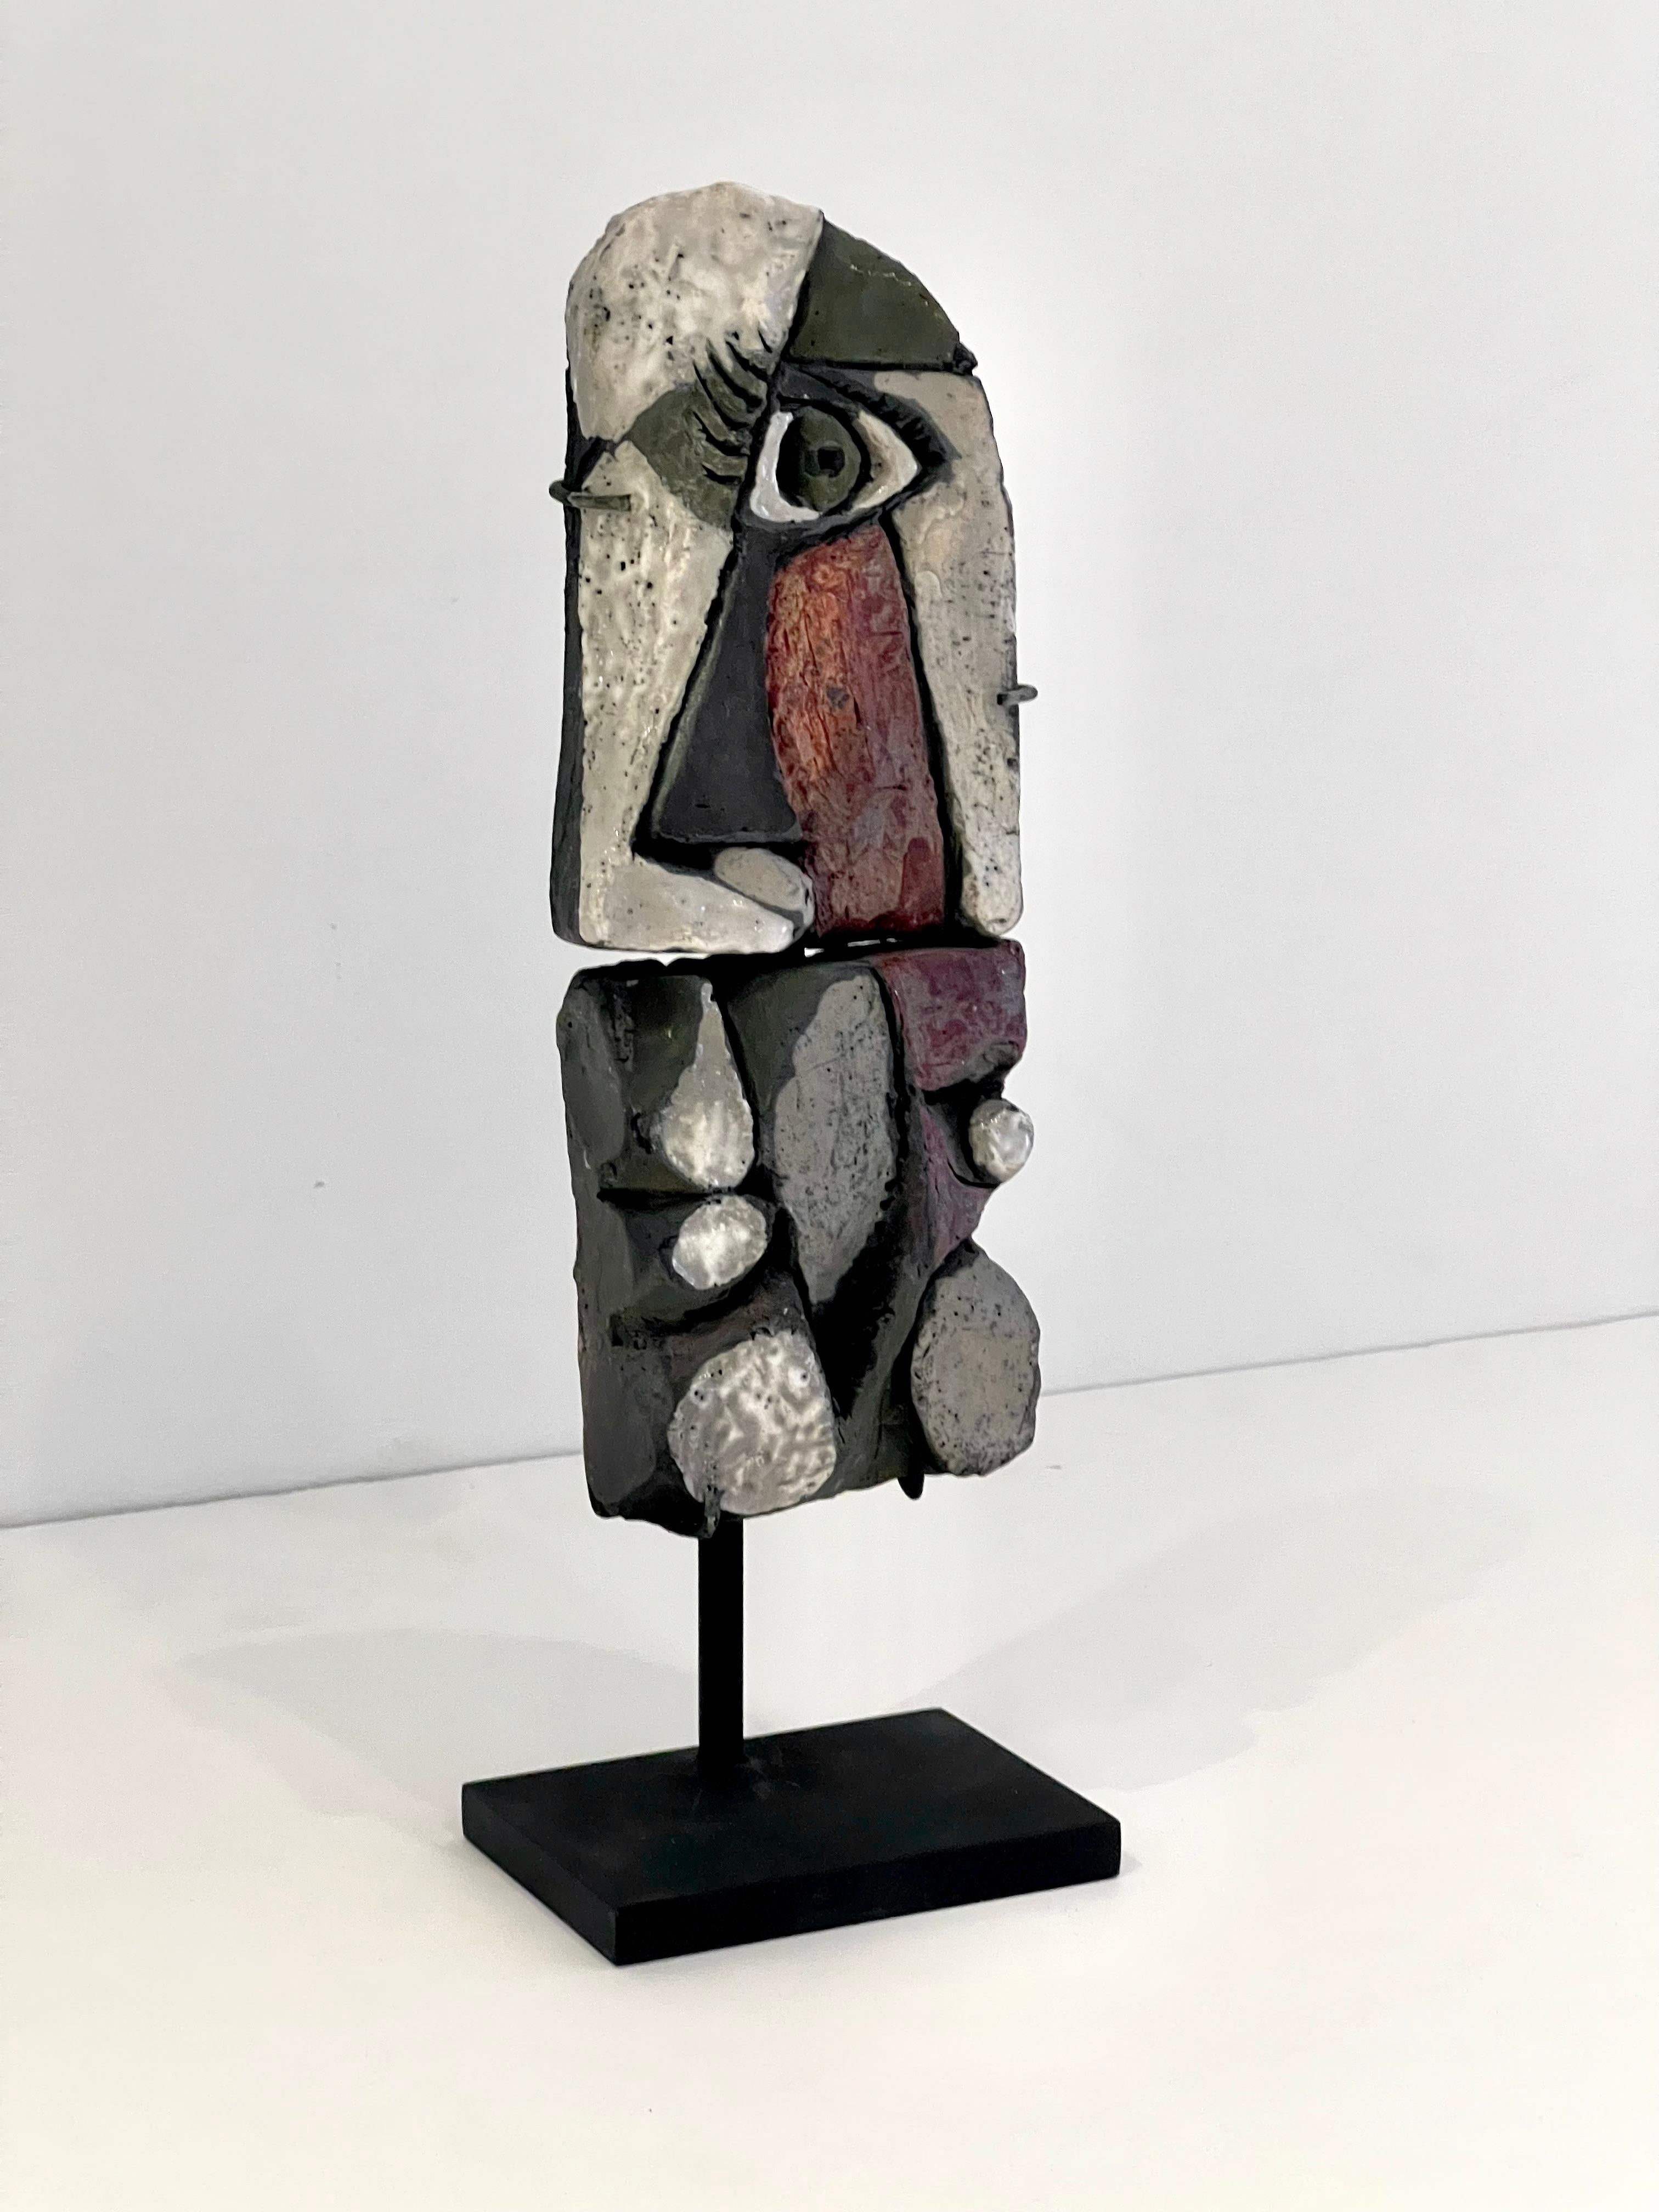 Abstract Ceramic Figural Sculpture by Roger Capron, France, 1970s.
Although he is primarily known for his tables, Roger Capron went on to create amazing sculptures later in his life.